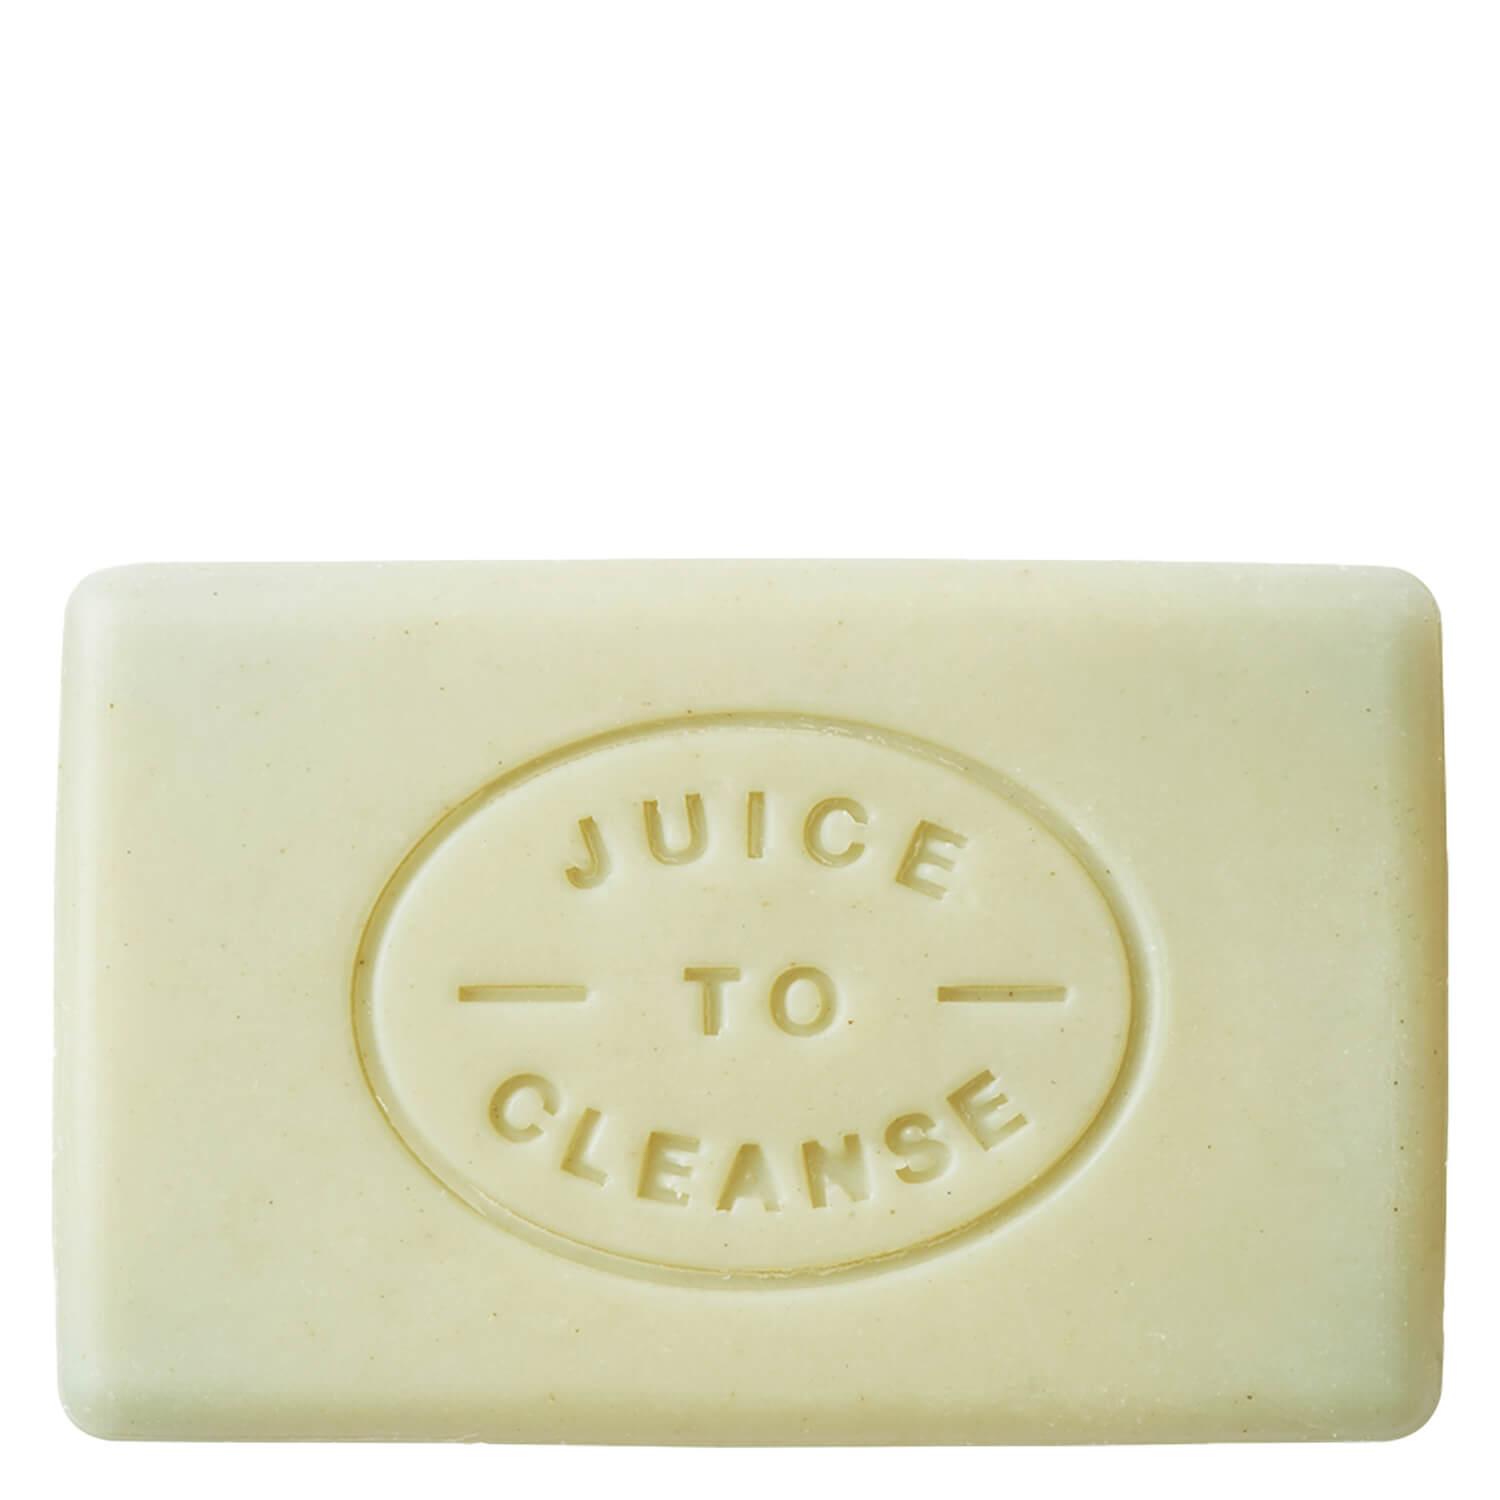 Juice to Cleanse - Clean Butter Shampoo Bar